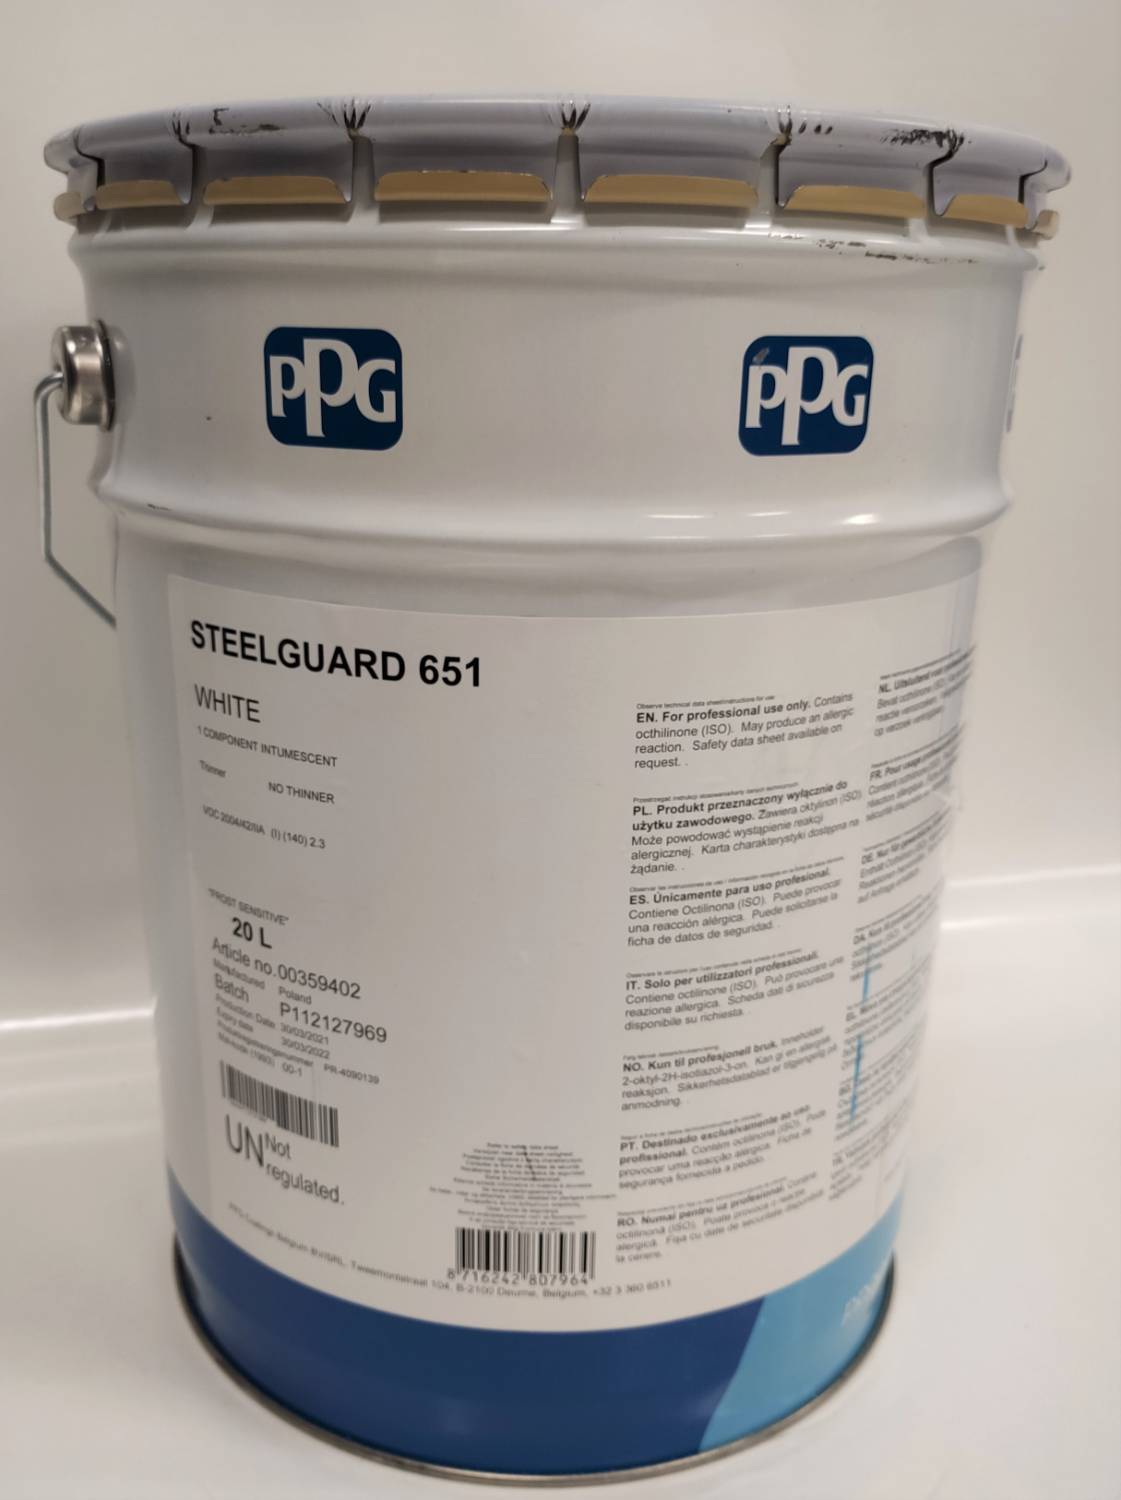 PPG STEELGUARD 651 Intumescent coating